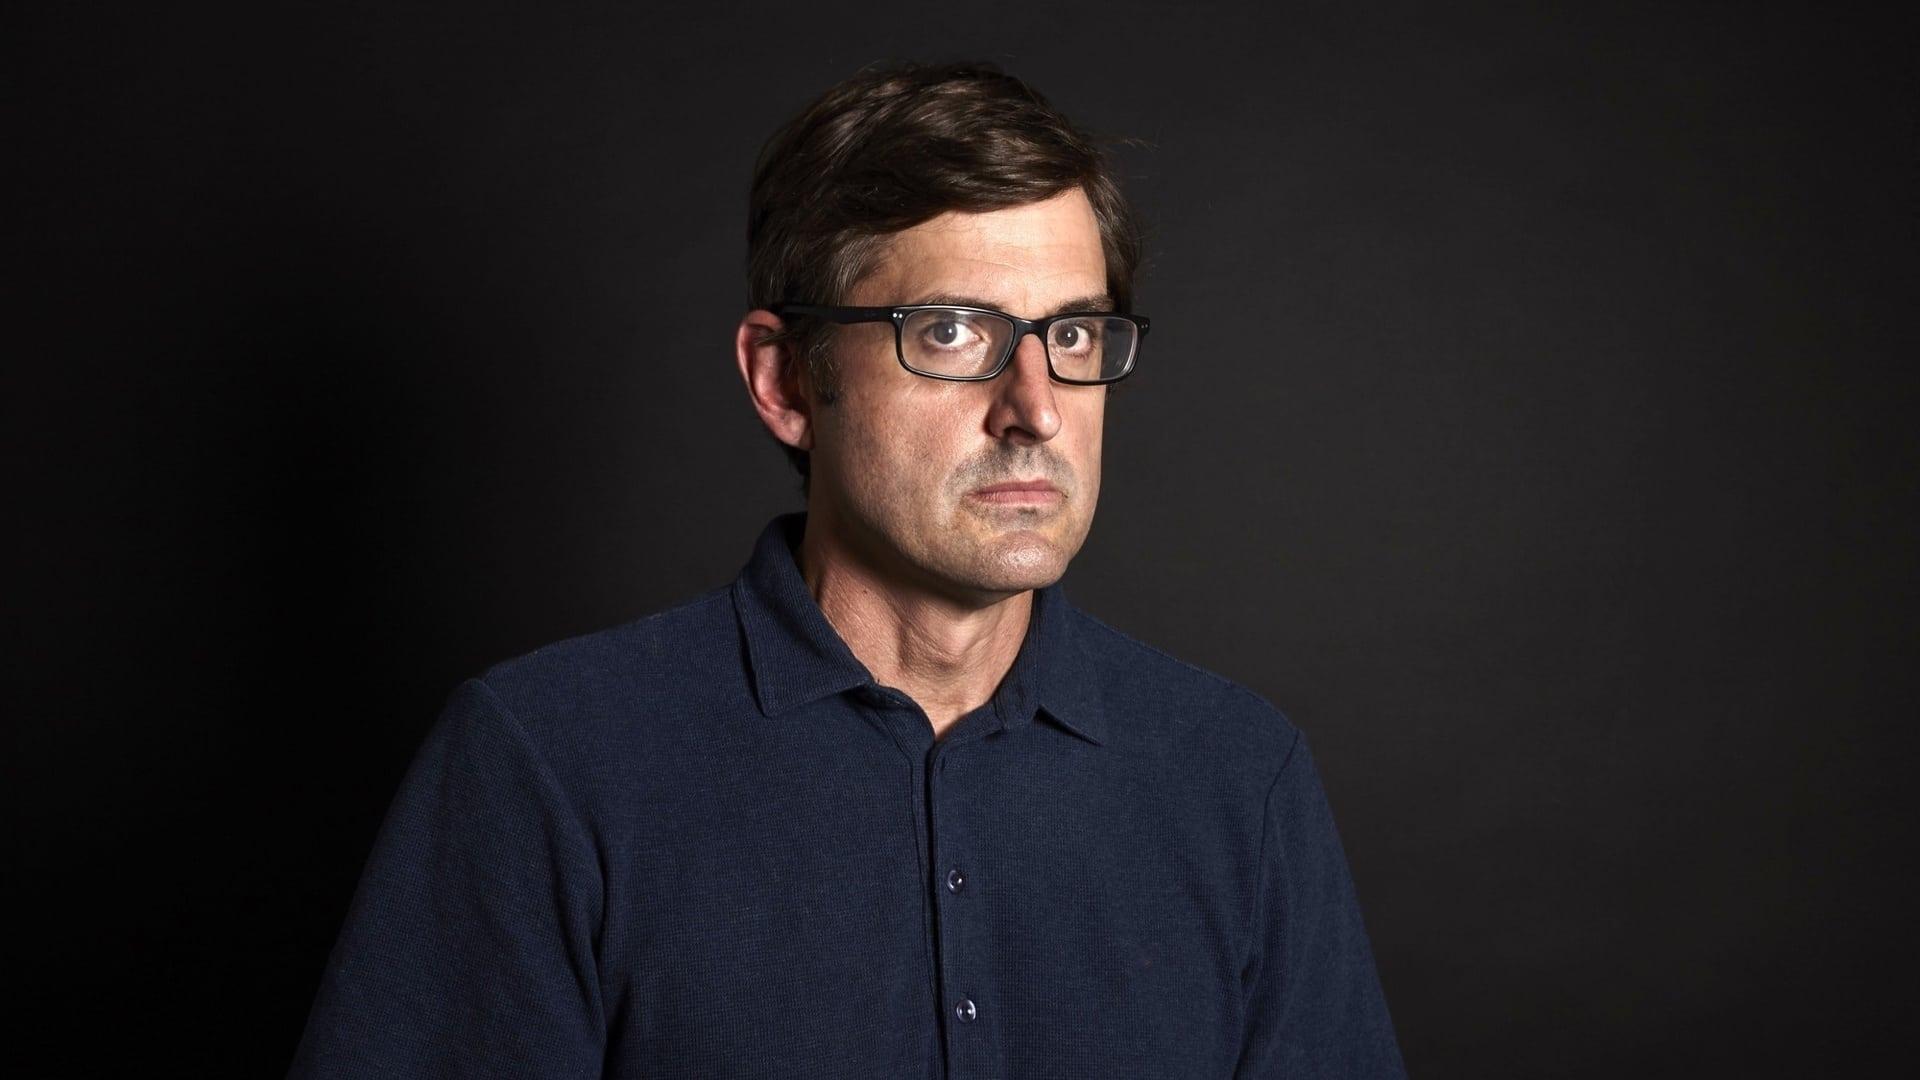 Louis Theroux: Altered States backdrop